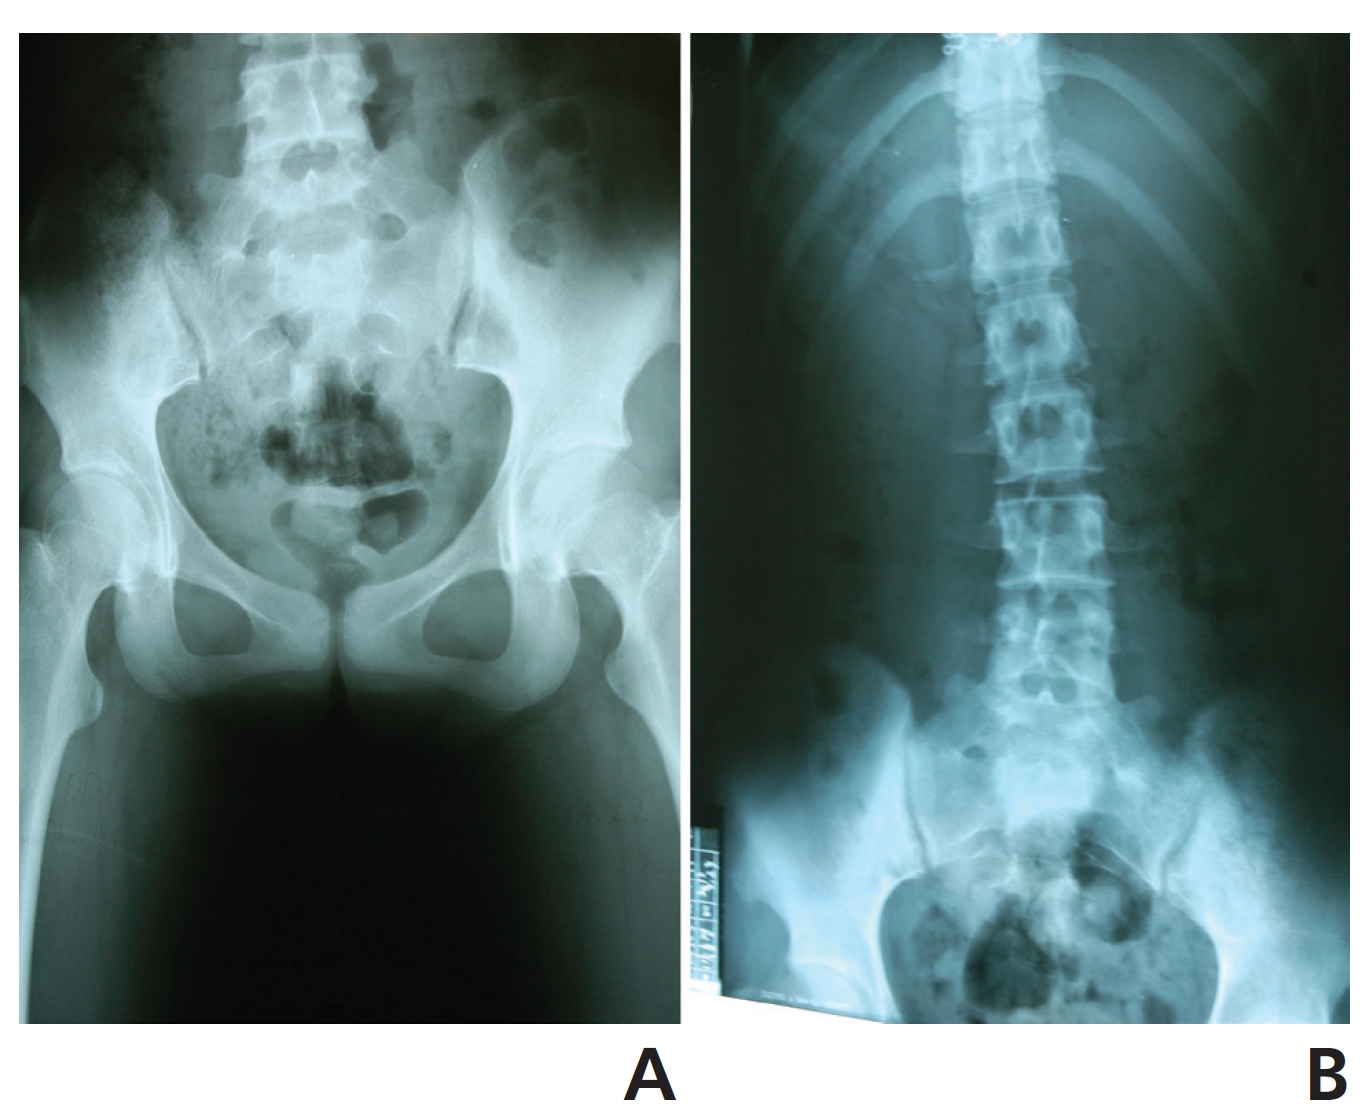 X-rays image taken in March 2013: (A) normal both hip joint
and (B) lumbar spine with mild scoliosis.